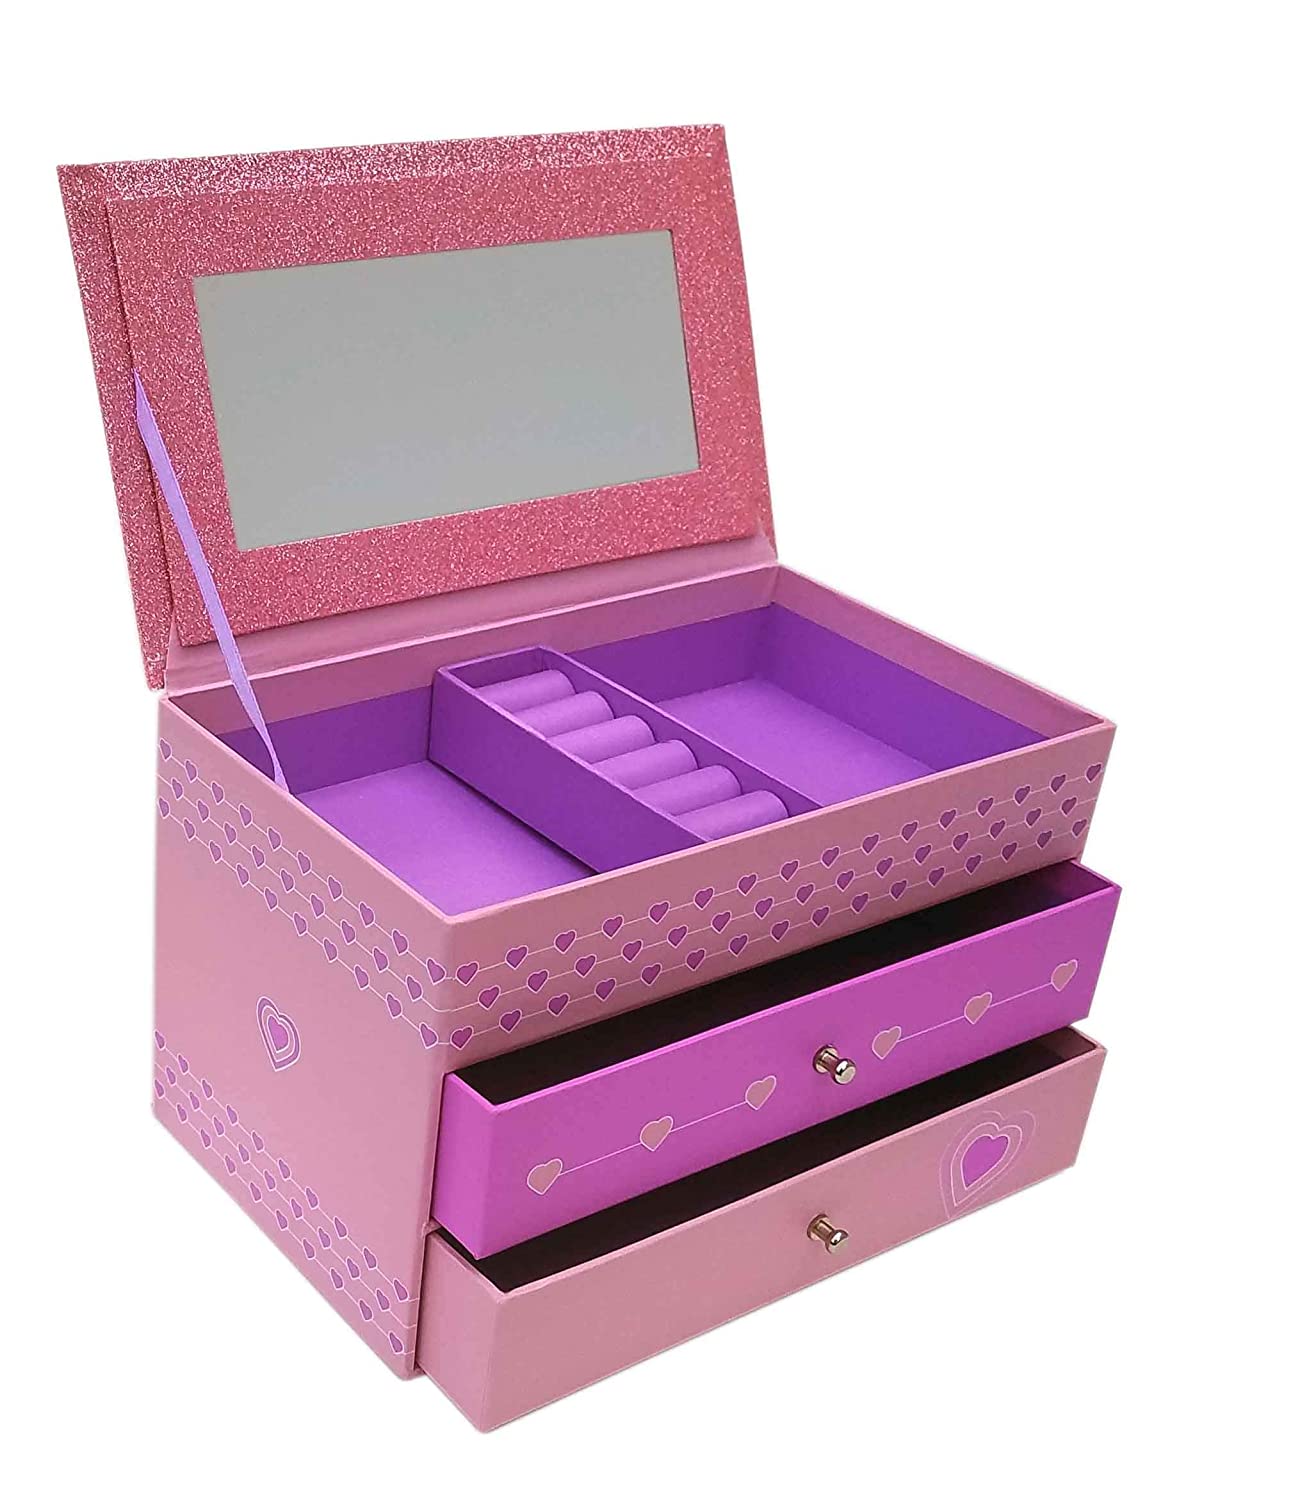 Jewelry Box for Girls - Pink and Purple Sparkles with Hearts and Pink and Purple Trim